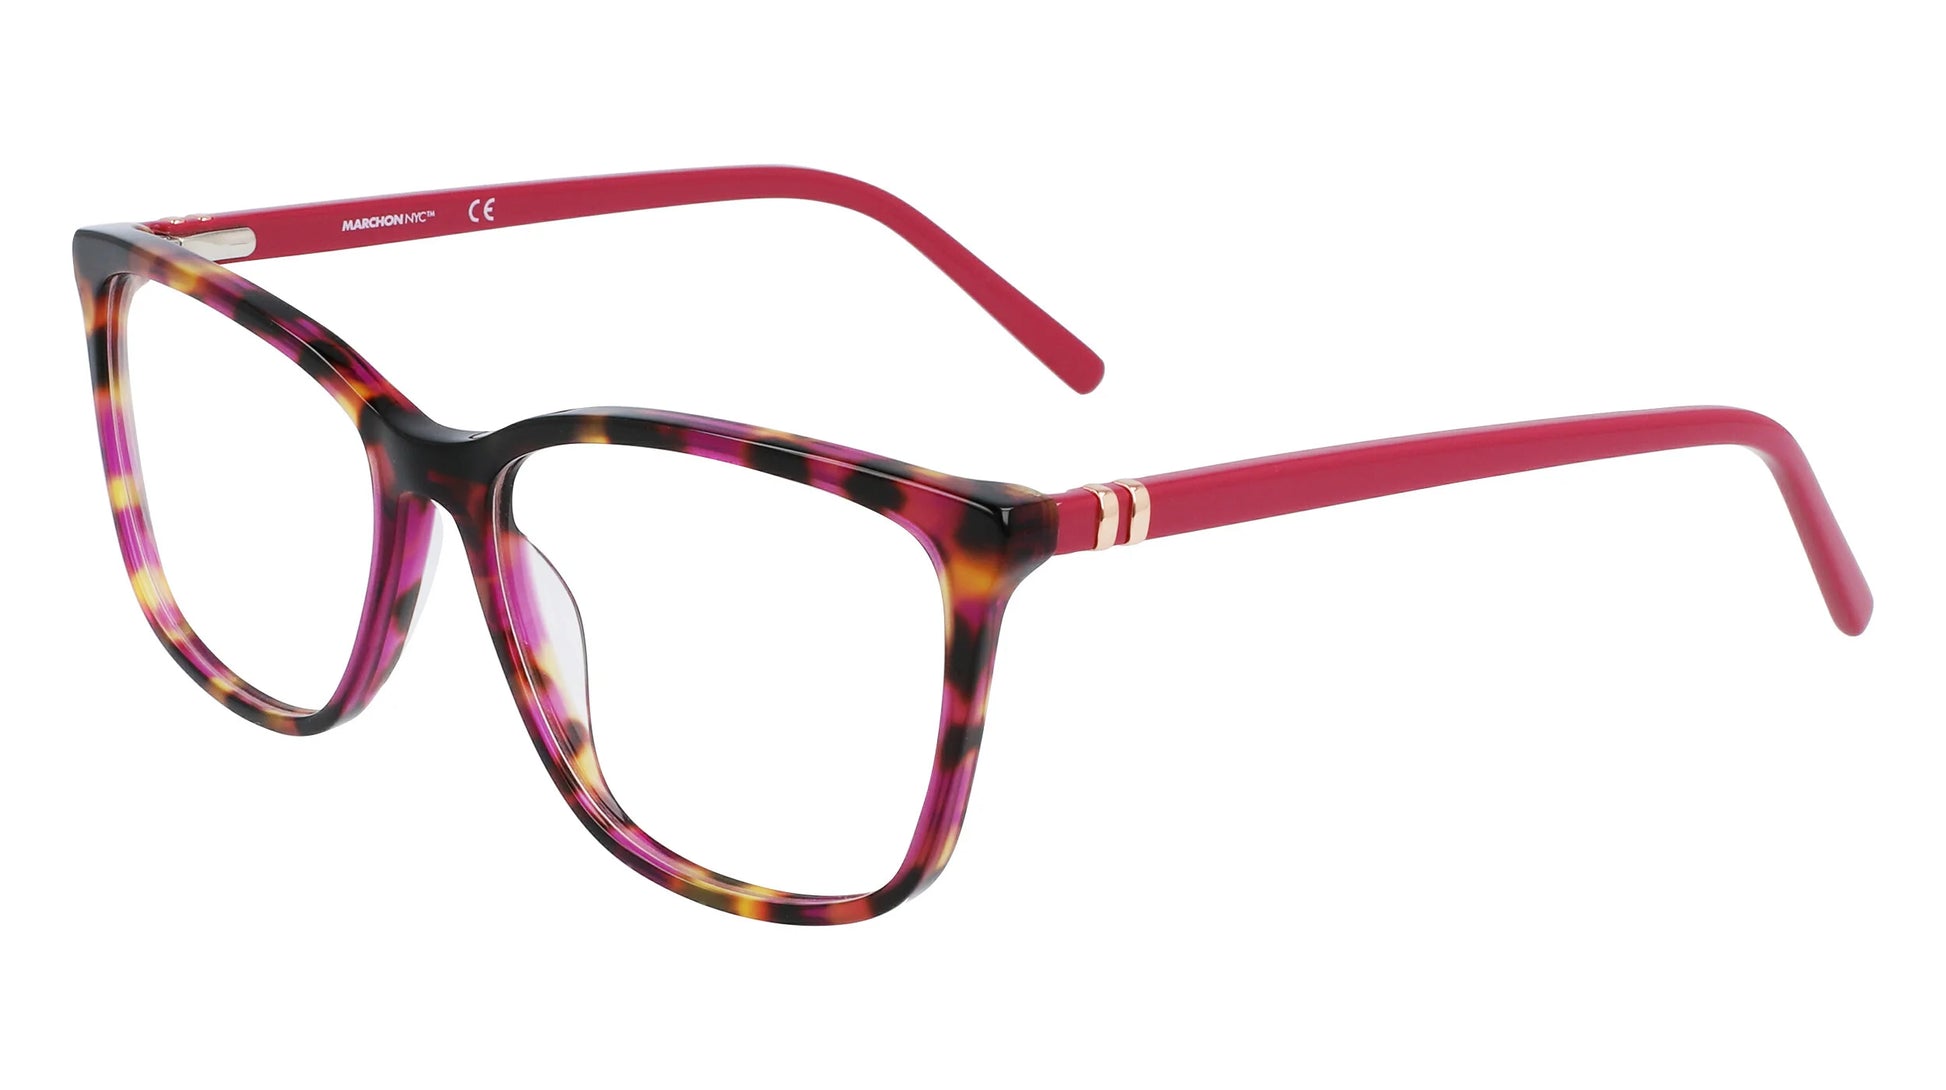 Marchon NYC M-5015 Eyeglasses Tortoise With Rose